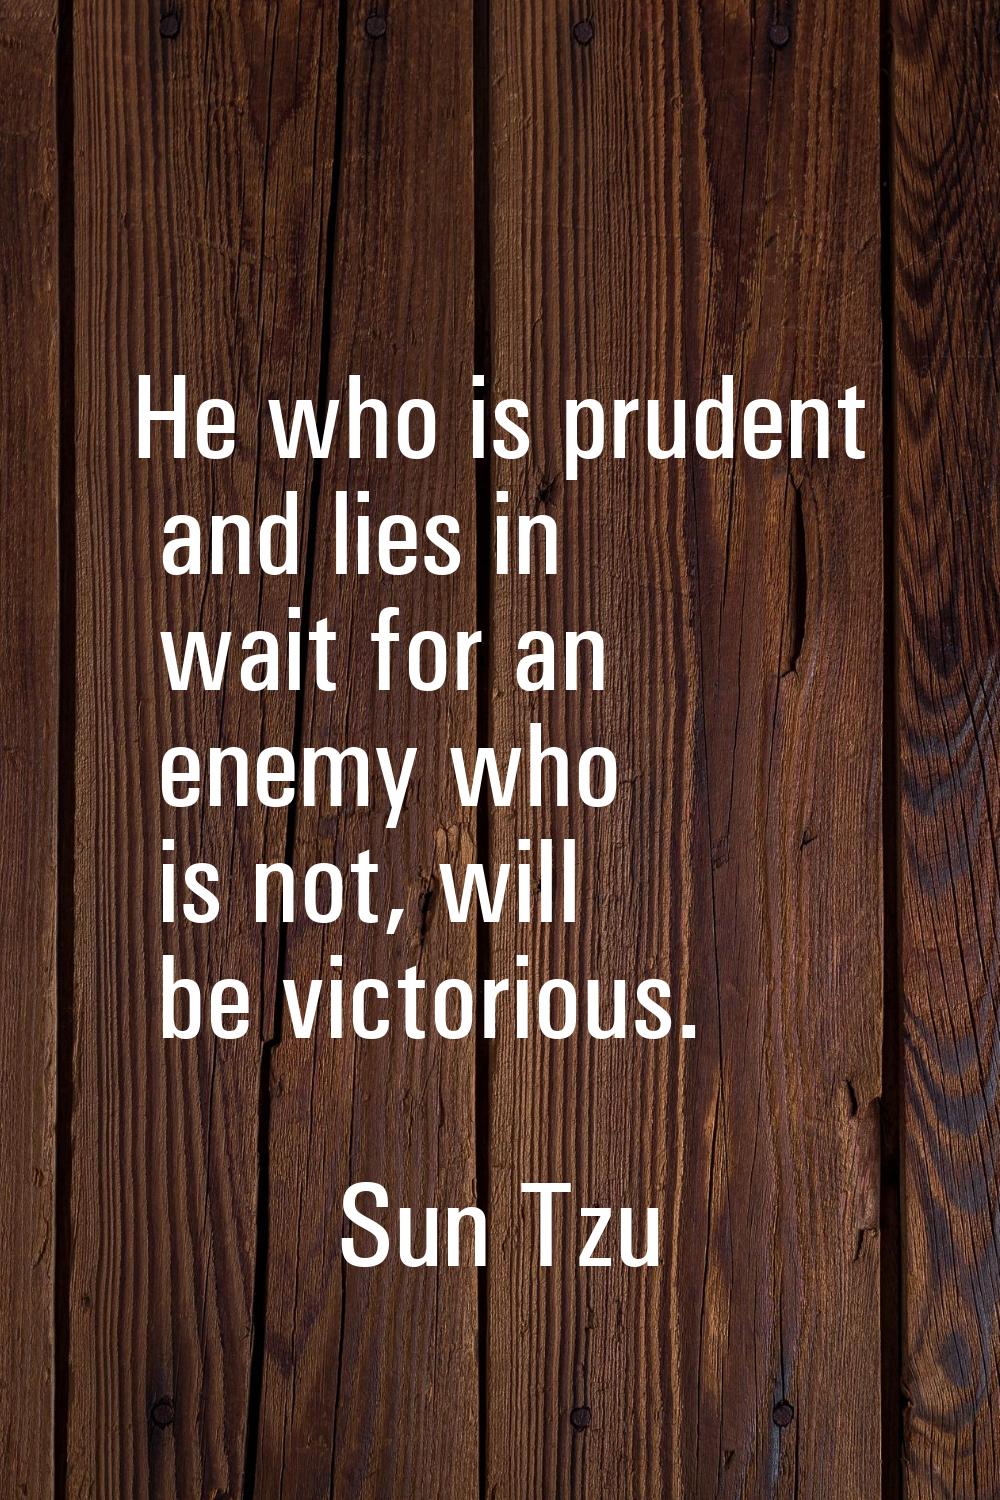 He who is prudent and lies in wait for an enemy who is not, will be victorious.